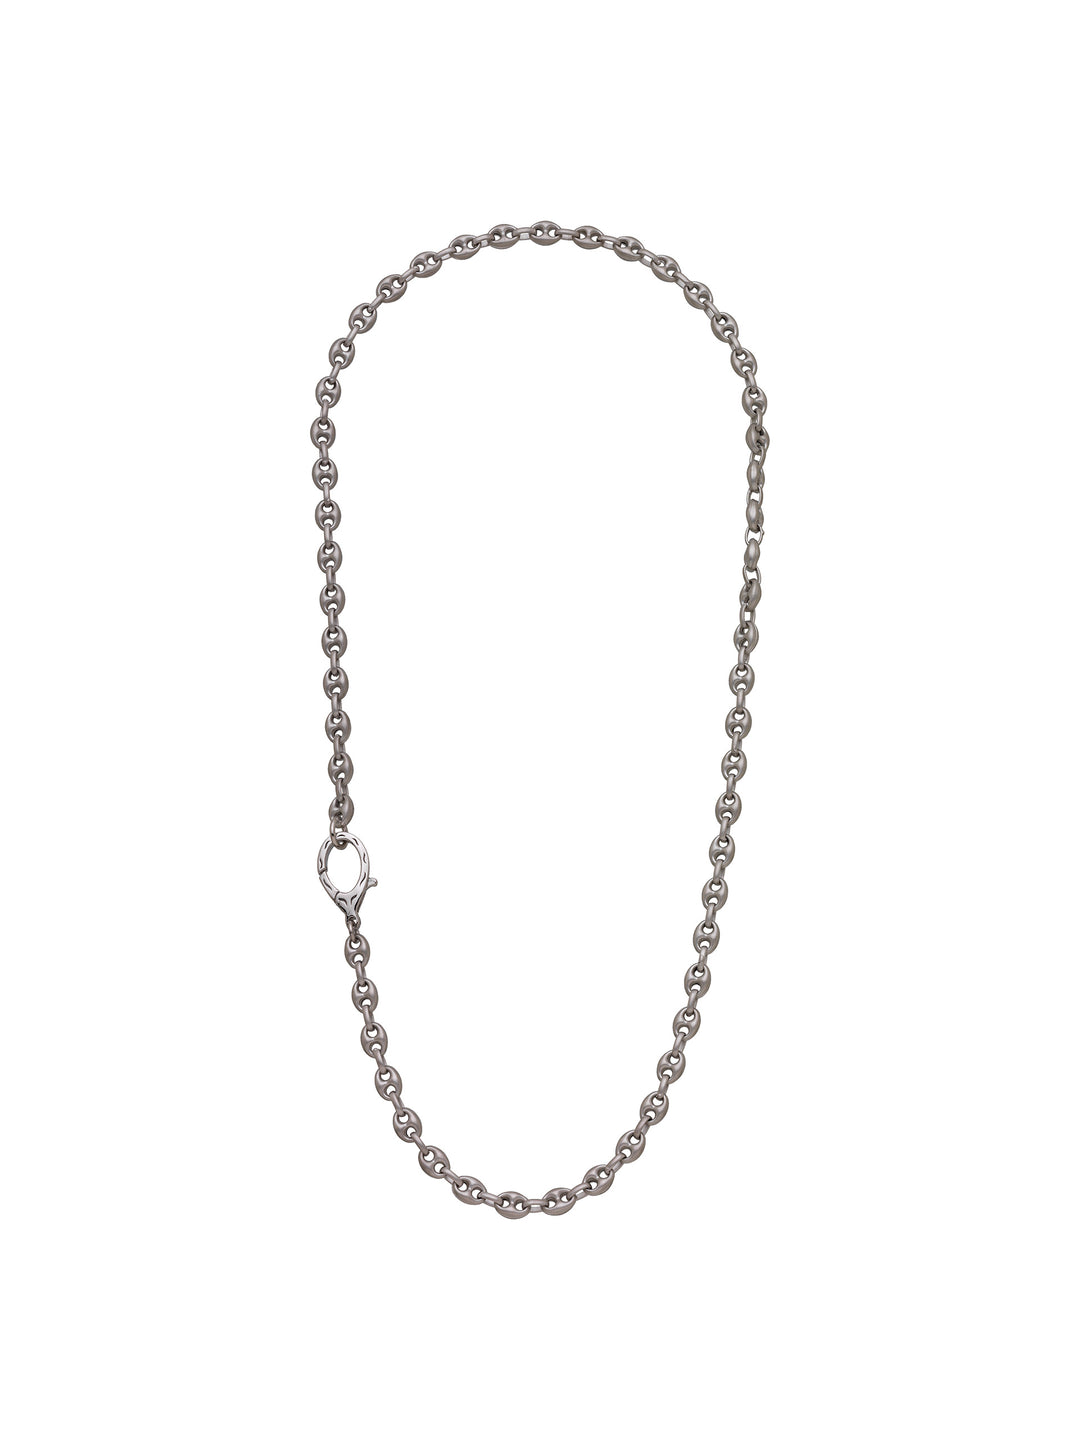 Ulysses Marine Silver Necklace with Matte Chain and Polished Clasp